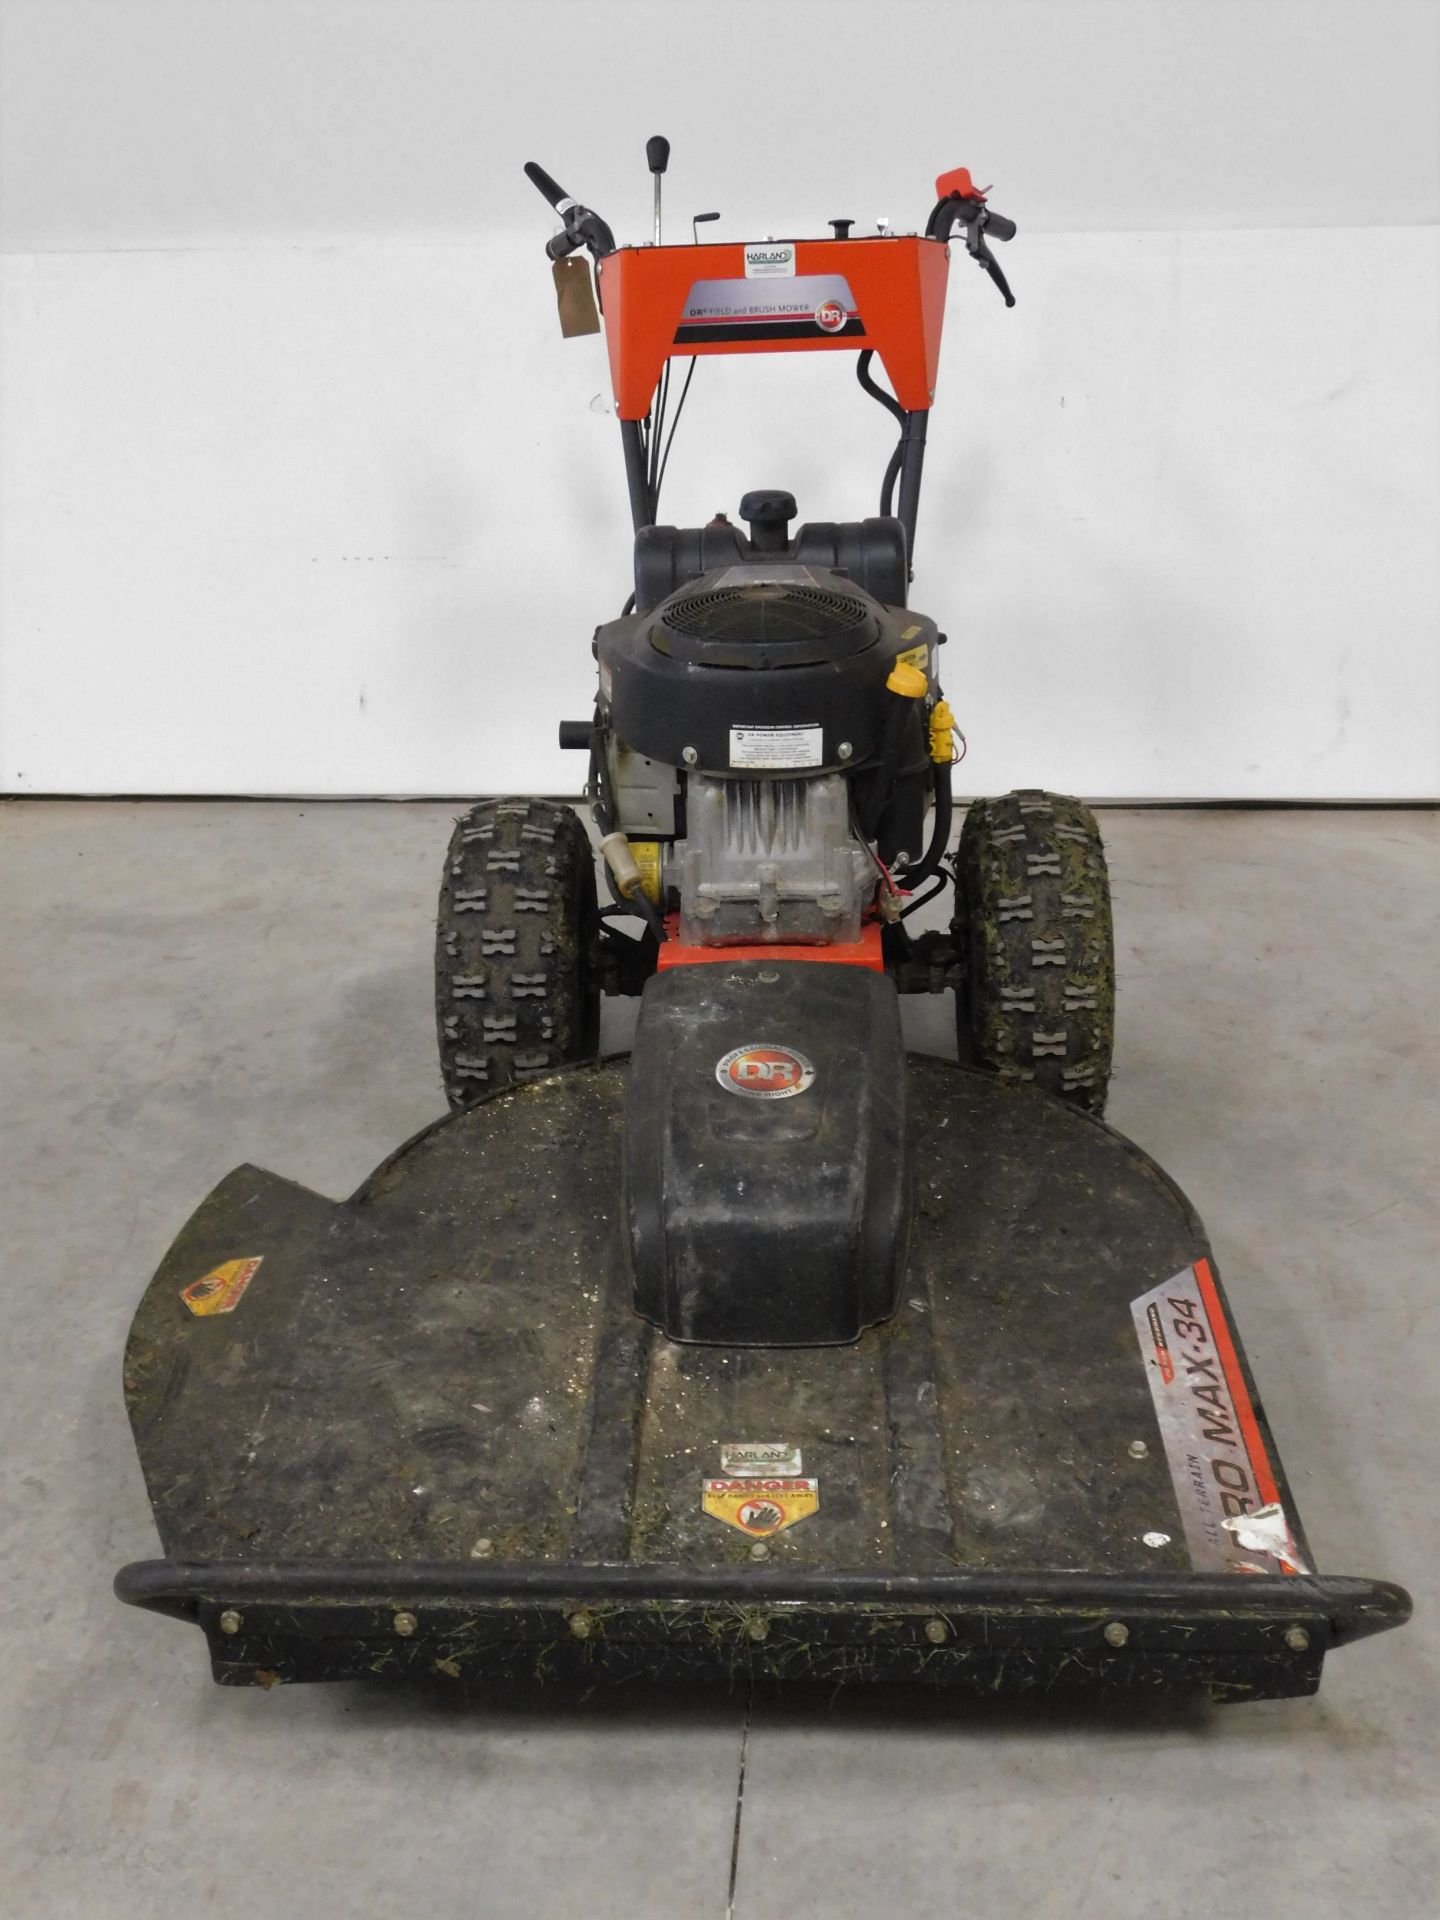 DR All Terrain Pro Max-34 Field & Brush Mower, Serial Number 3005428329 with Briggs & Stratton 656cc - Image 2 of 6